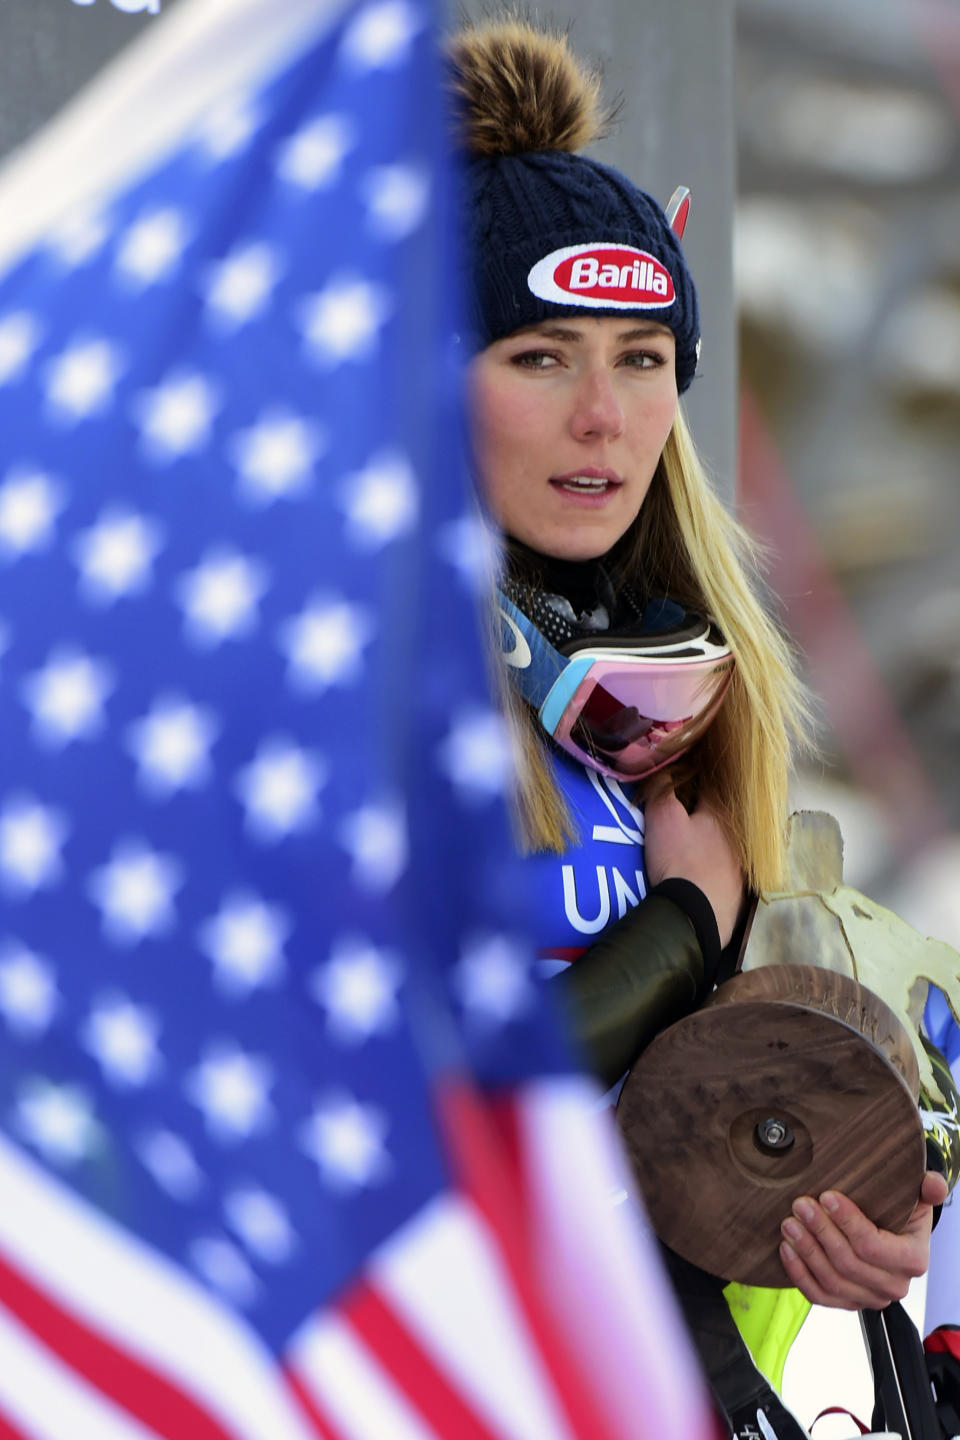 FILE - In this Dec. 29, 2019, file photo, first placed United States' Mikaela Shiffrin celebrates on the podium after completing a women's World Cup slalom ski race in Lienz, Austria. The Associated Press spoke to more than two dozen athletes from around the globe -- representing seven countries and 11 sports -- to get a sense of how concerned or confident they are about resuming competition. “If the tests don’t come back for a couple of days and what-not, how does that really work?” said ski racer Mikaela Shiffrin, a two-time Olympic gold medalist and three-time World Cup overall champion. “It’s good to know if you test positive or negative. But if we’re talking about being tested today so we can race tomorrow, but the results don’t come back for two days, it doesn’t really help.” (AP Photo/Pier Marco Tacca, File)